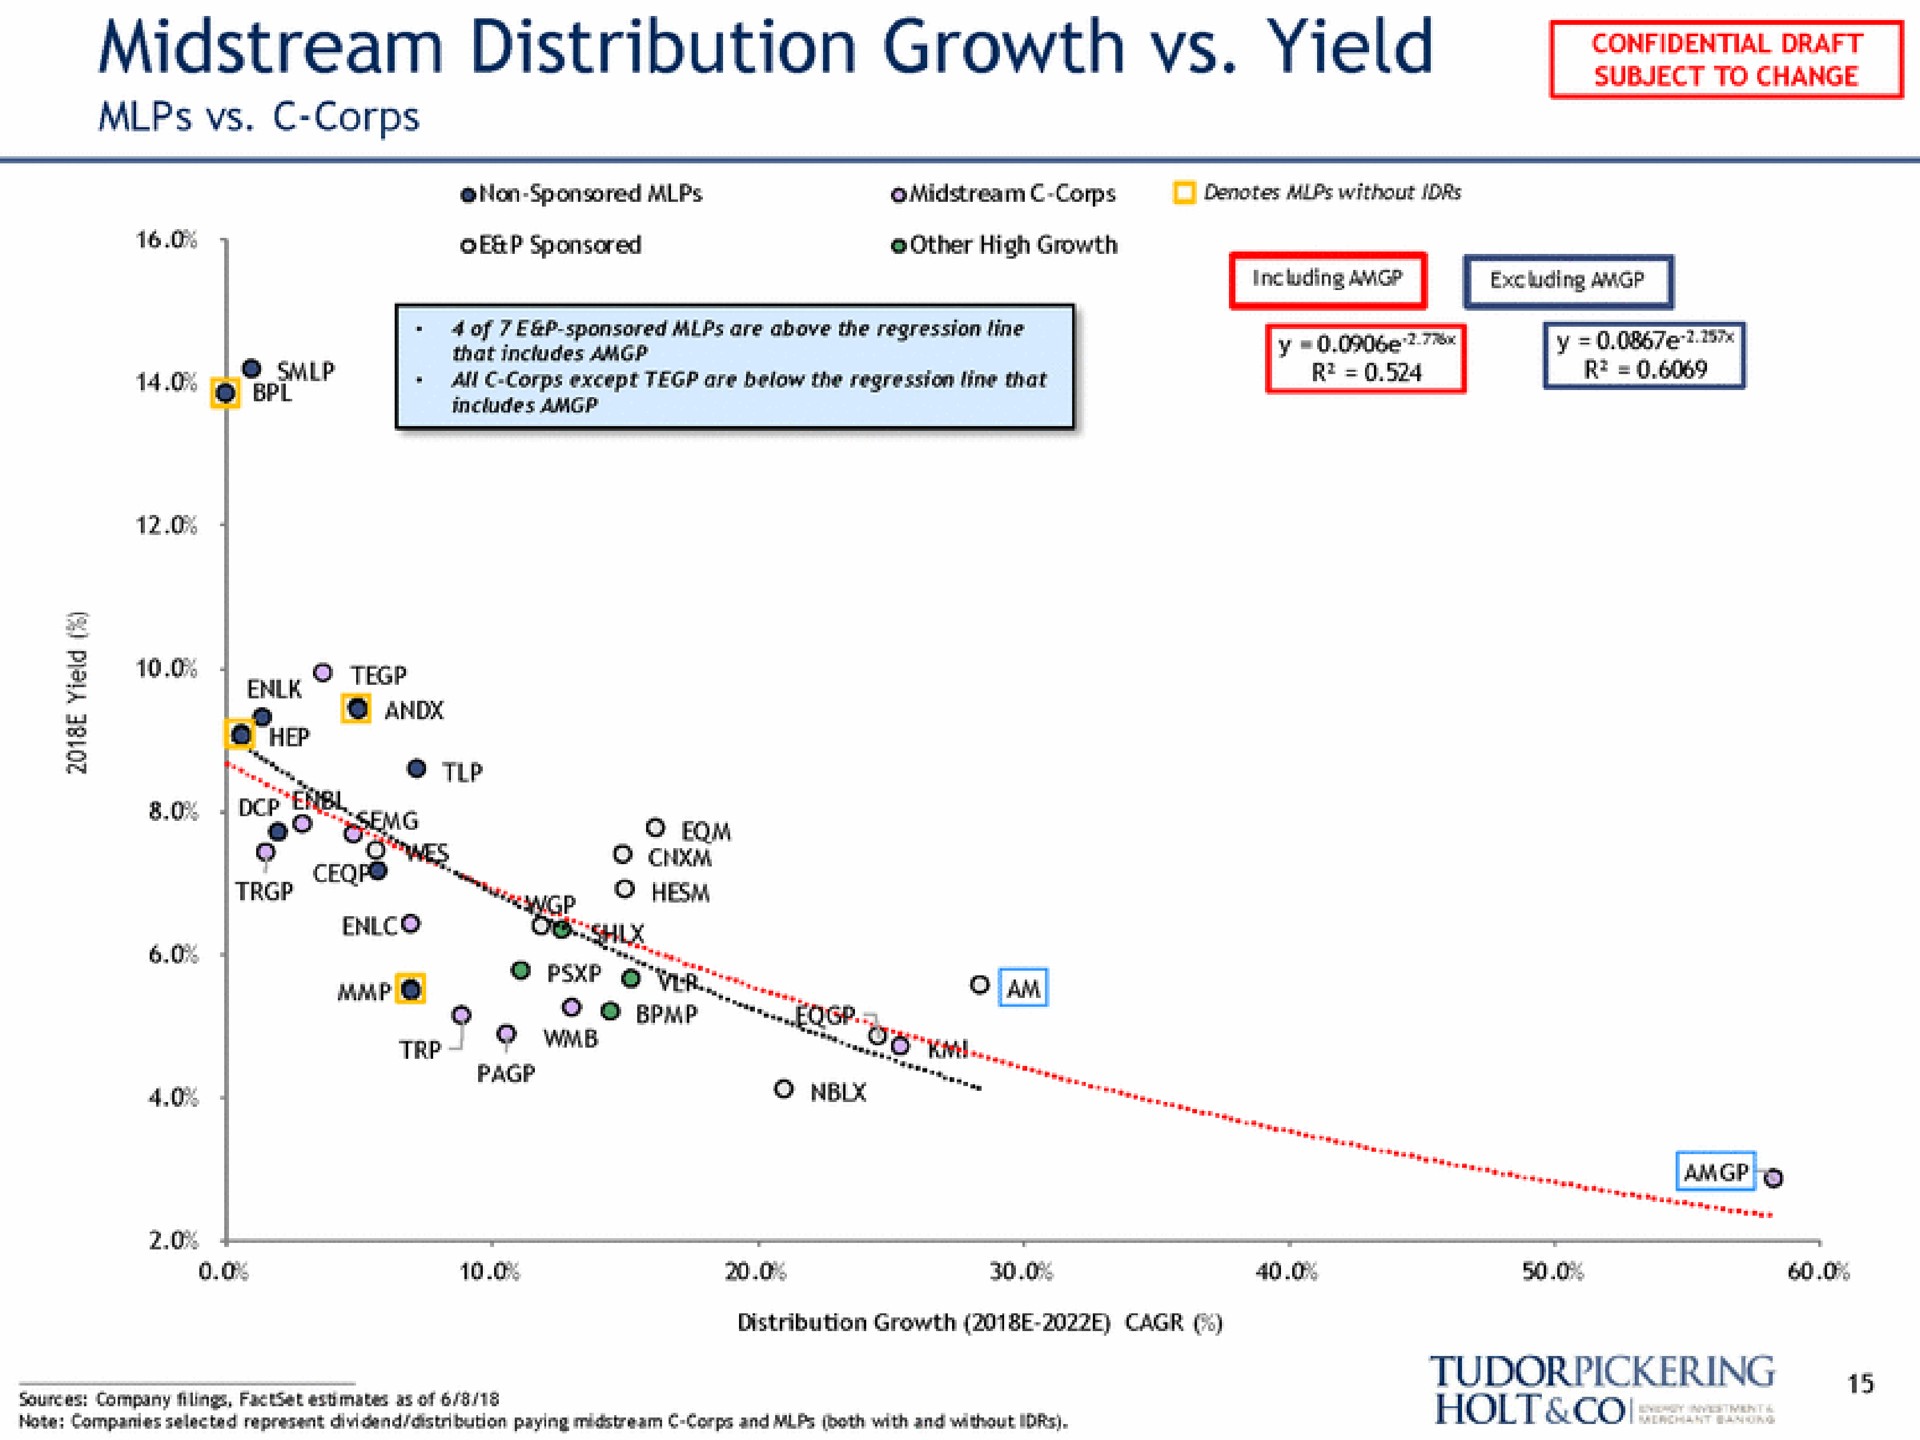 midstream distribution growth yield corps | Tudor, Pickering, Holt & Co